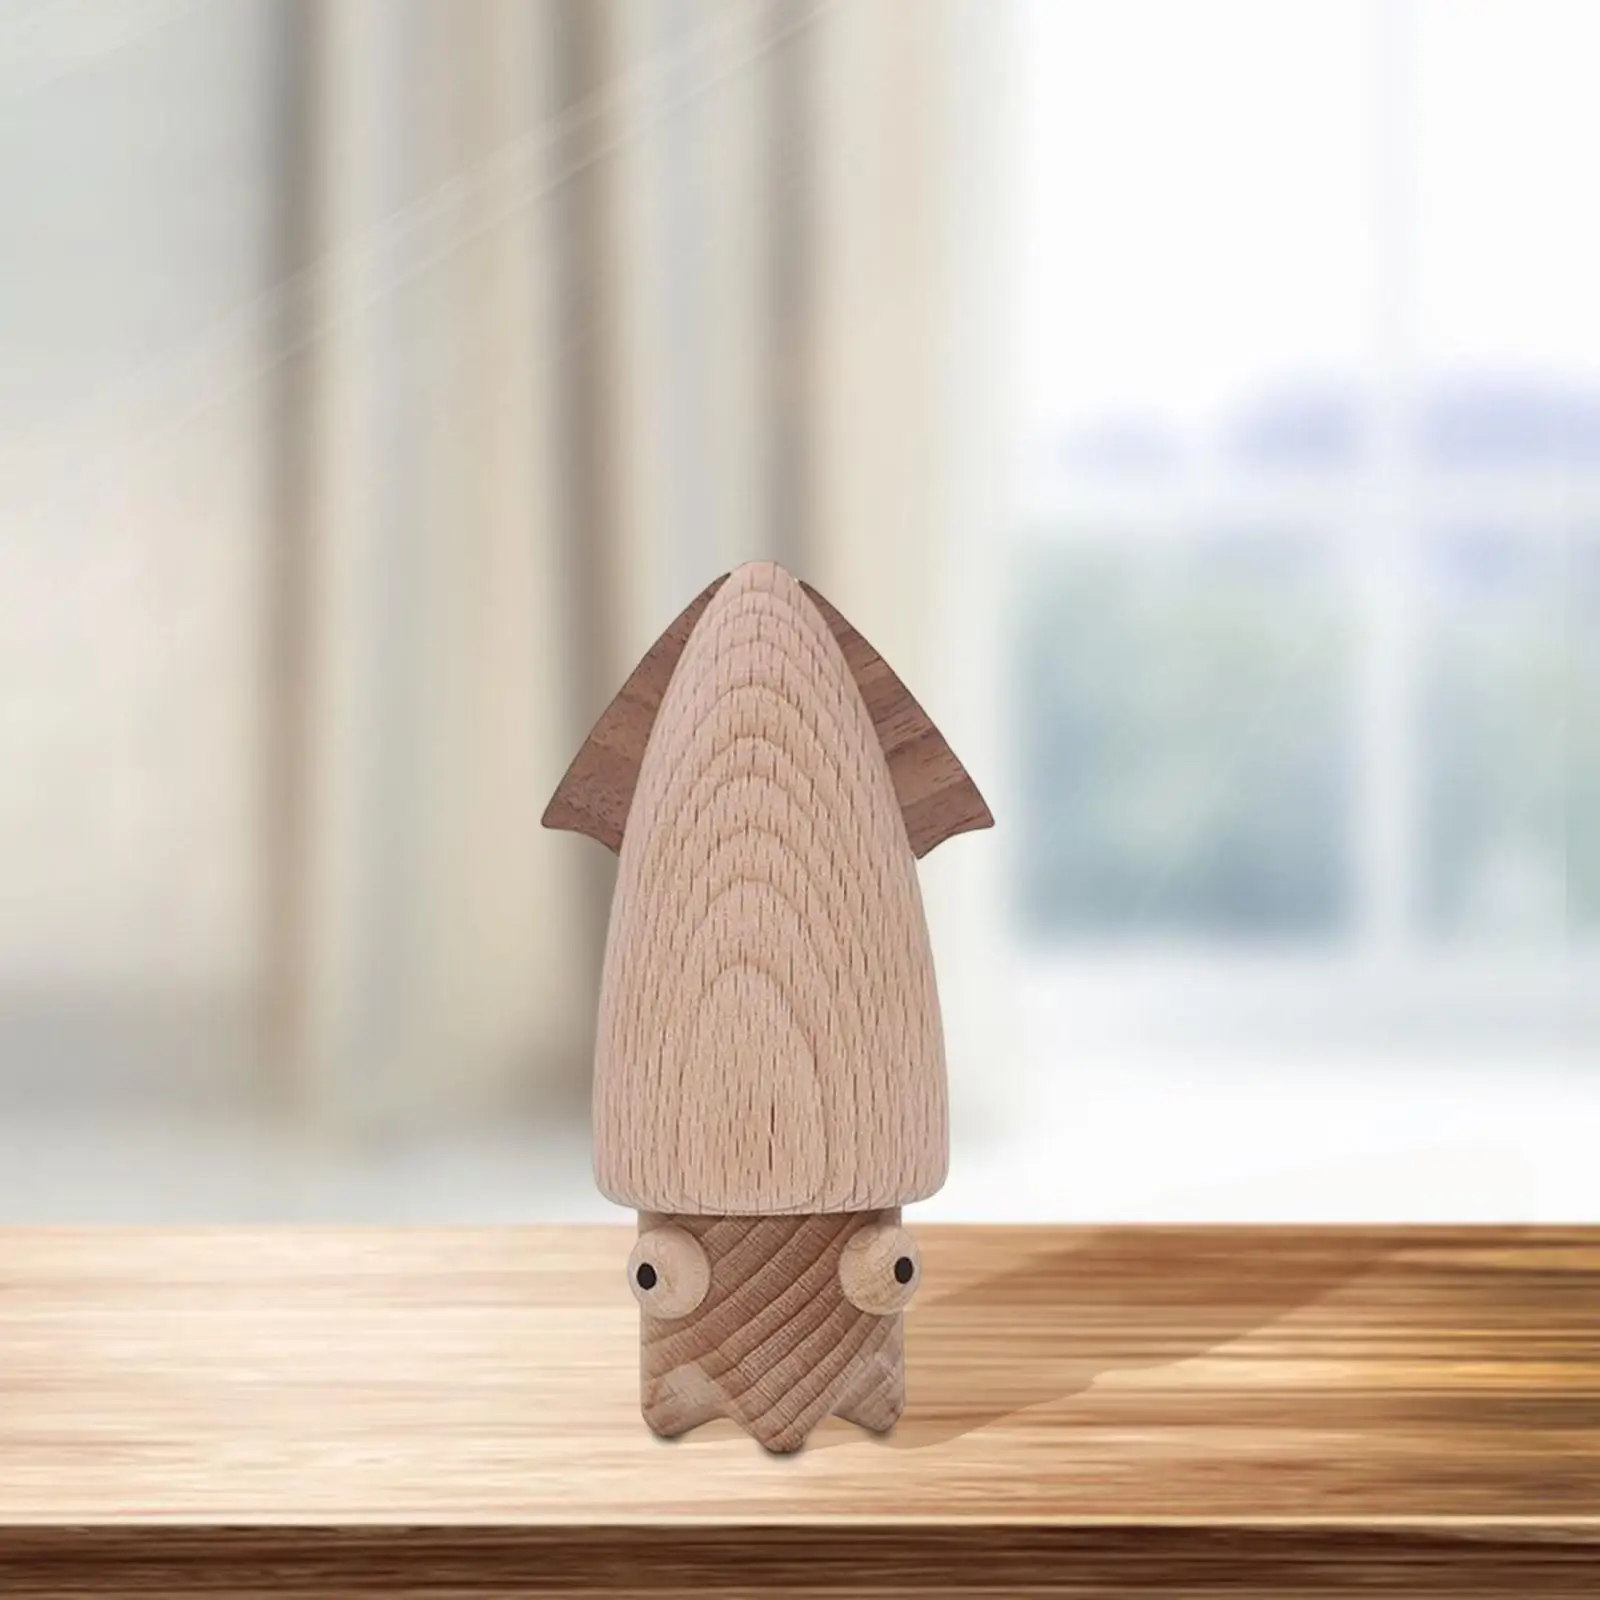 

Cute Toothpick Holder Ornament Countertop Decor Squid Design Wood Storage Organizer Dispenser for Dining Table Party Bars Home